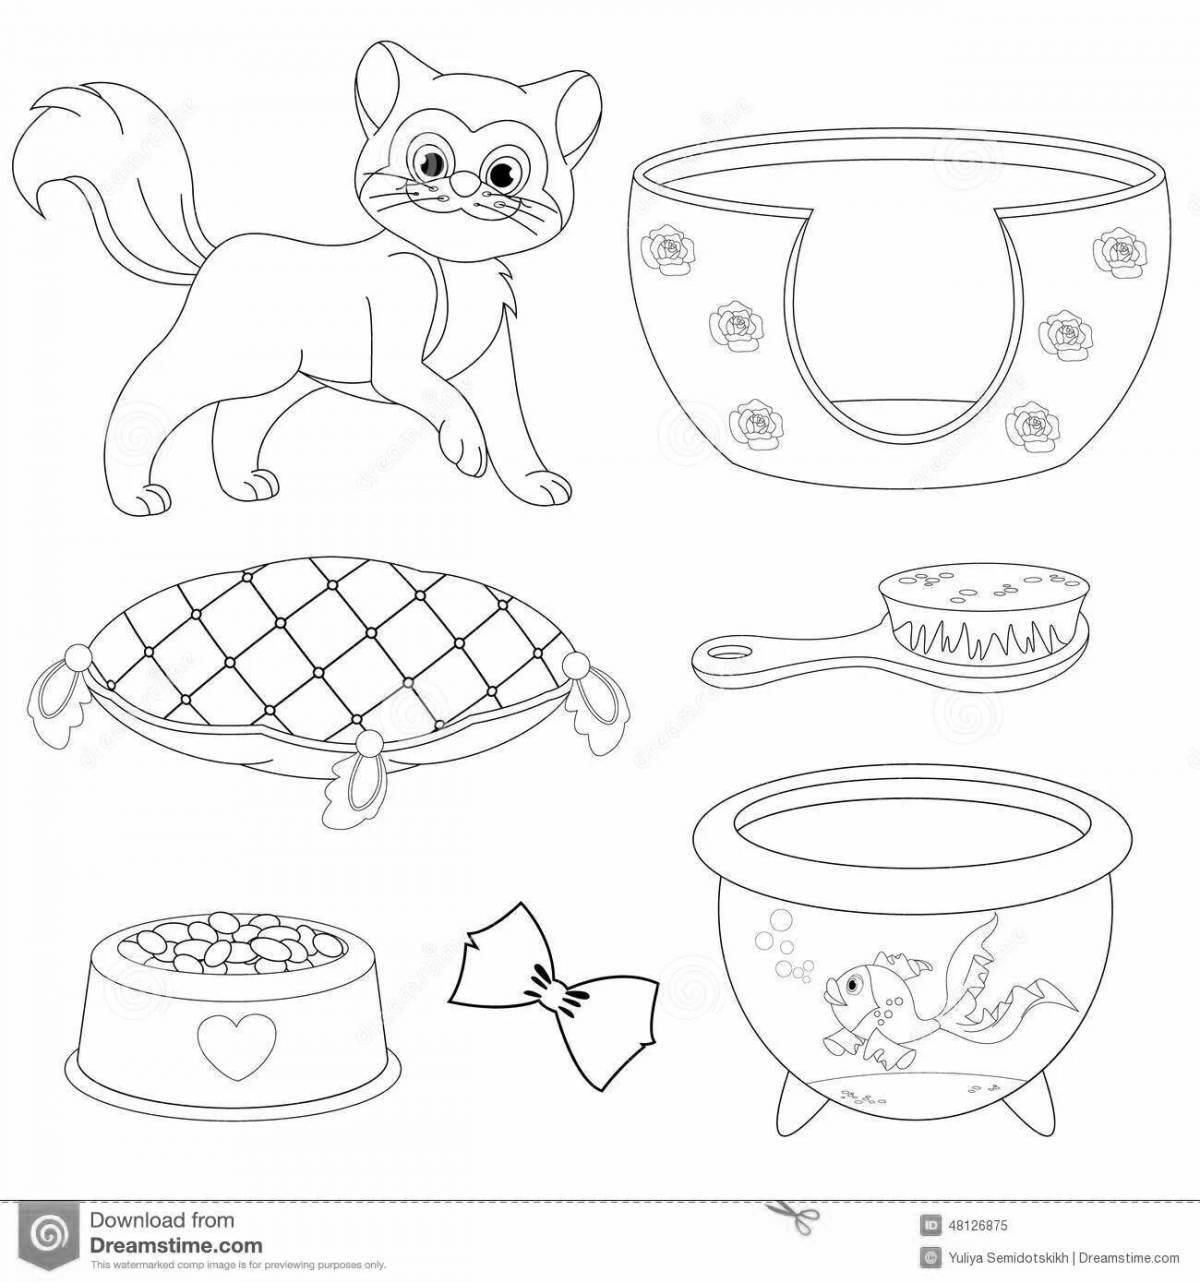 Spectacular cat food coloring page